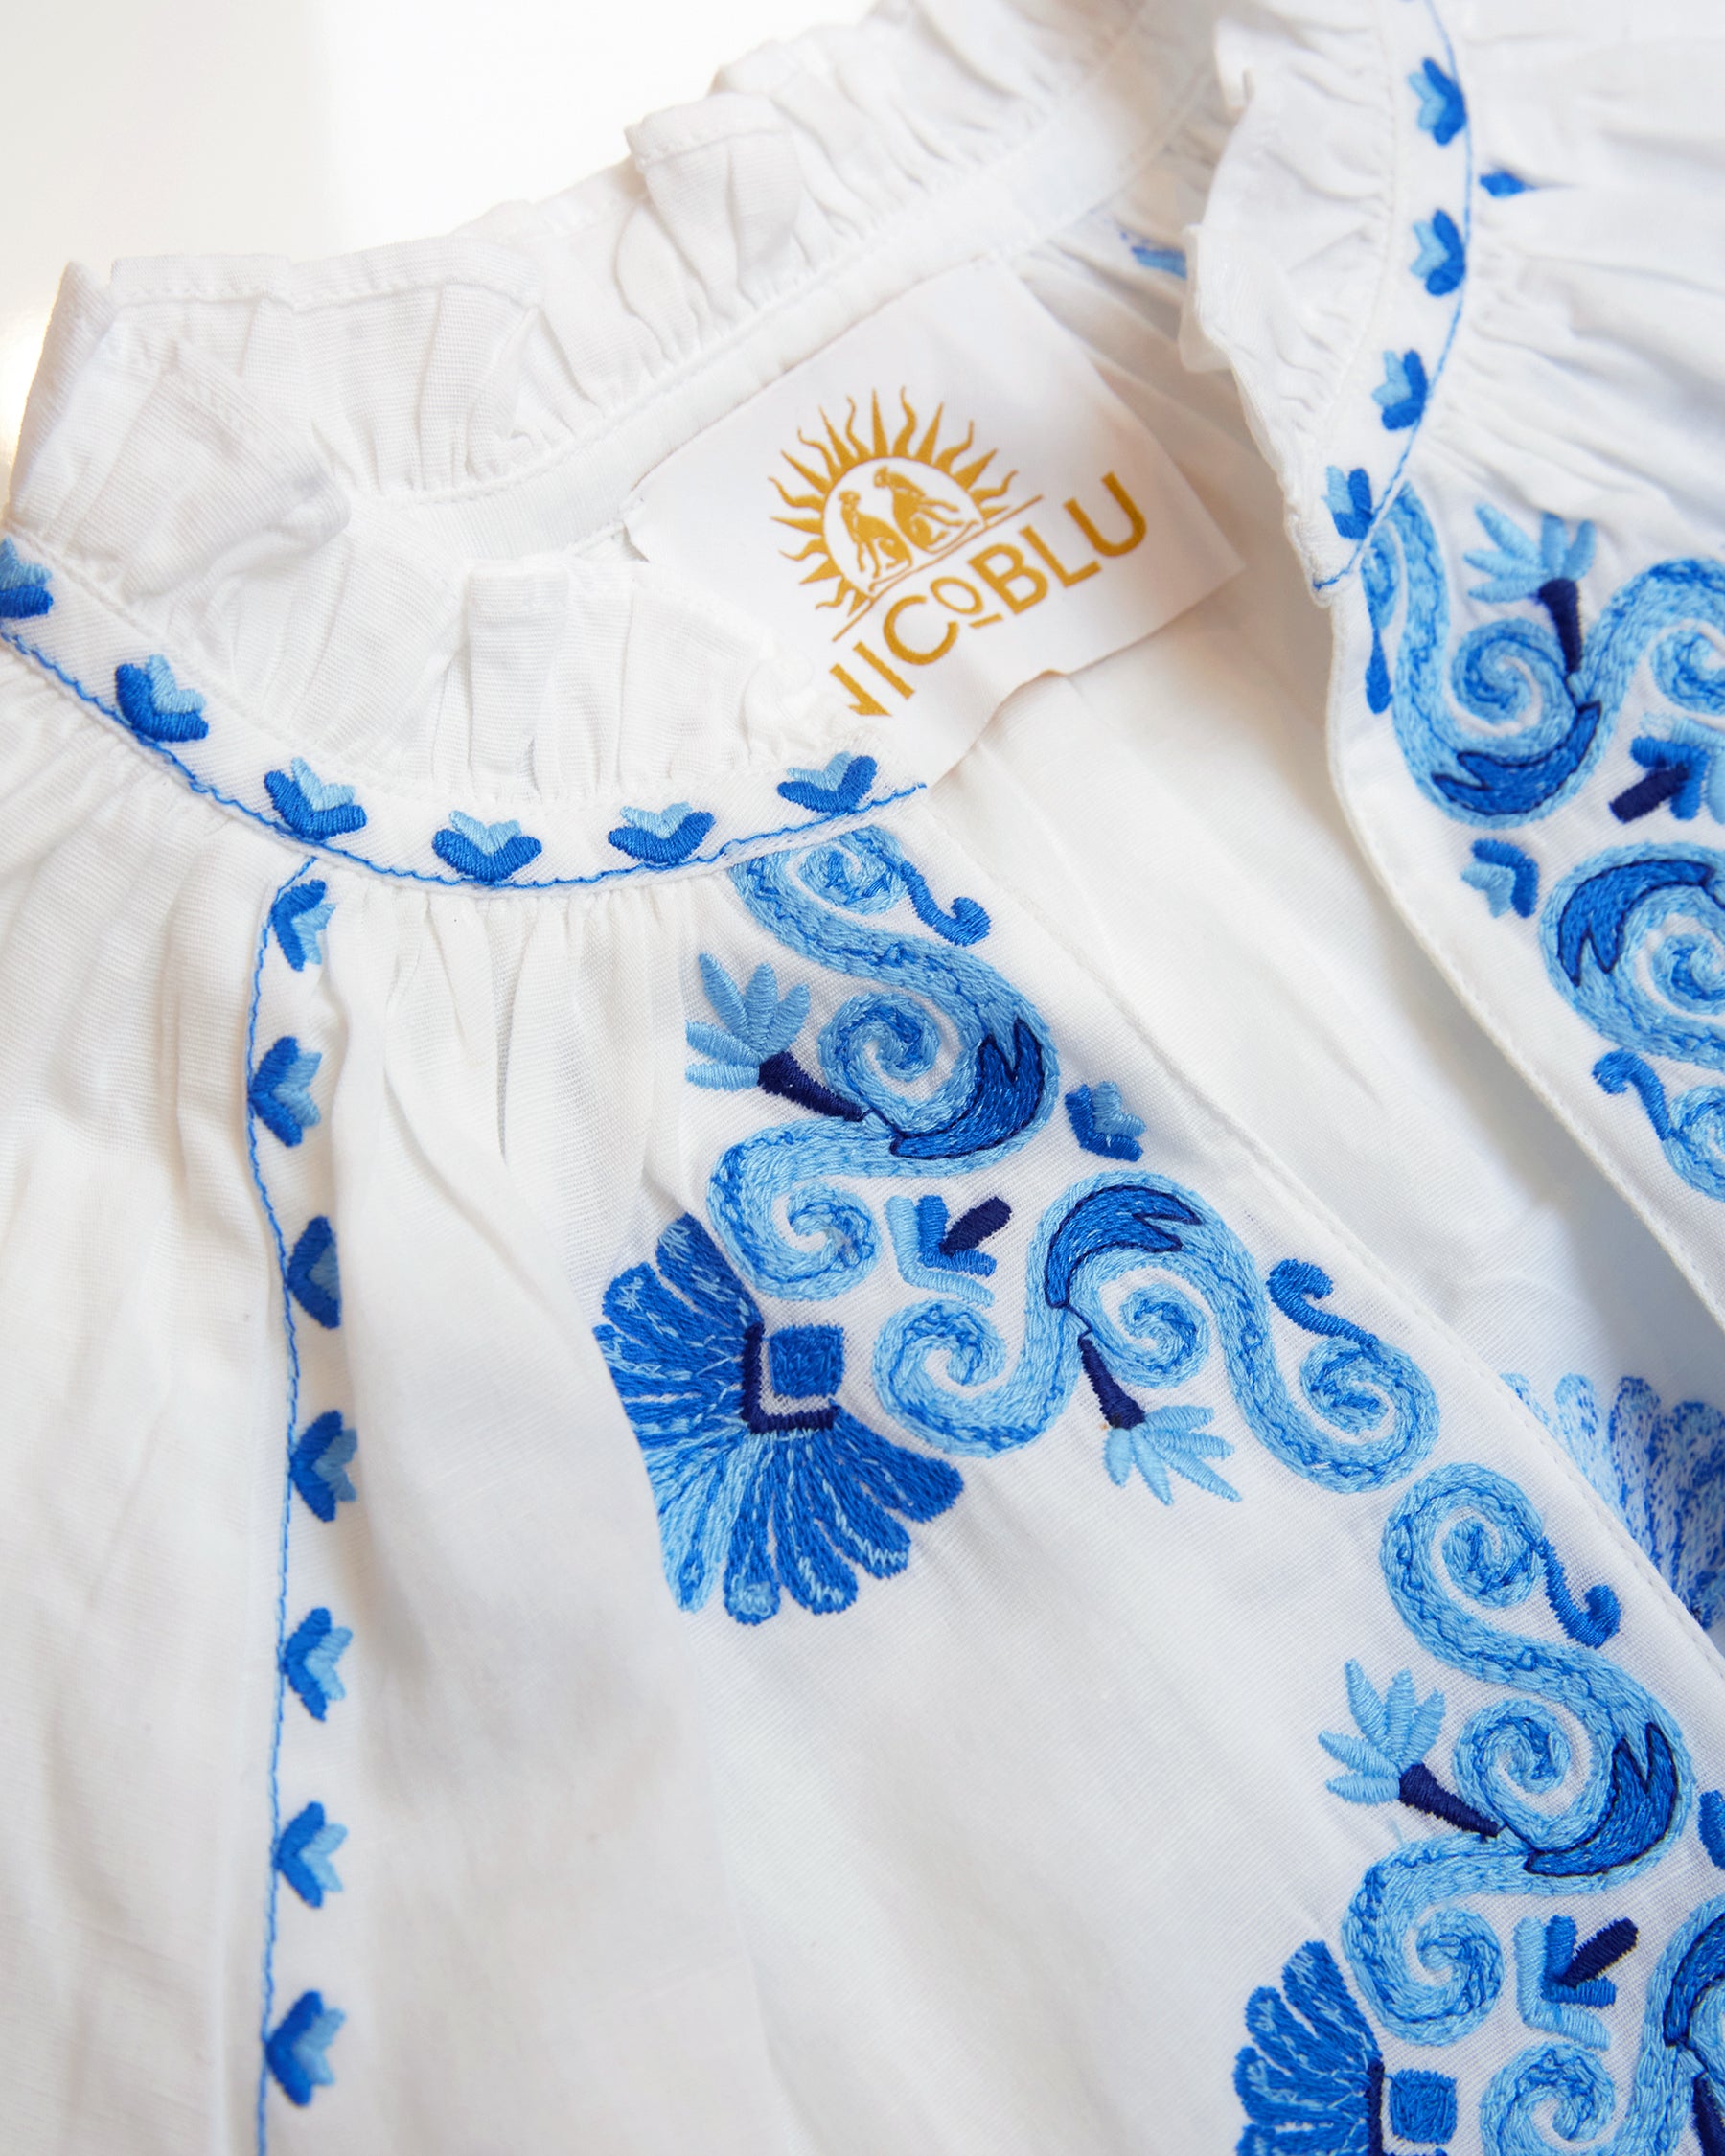 Menorca Peasant Blouse and Grecian Motif Embroidery-Detail of embroidery